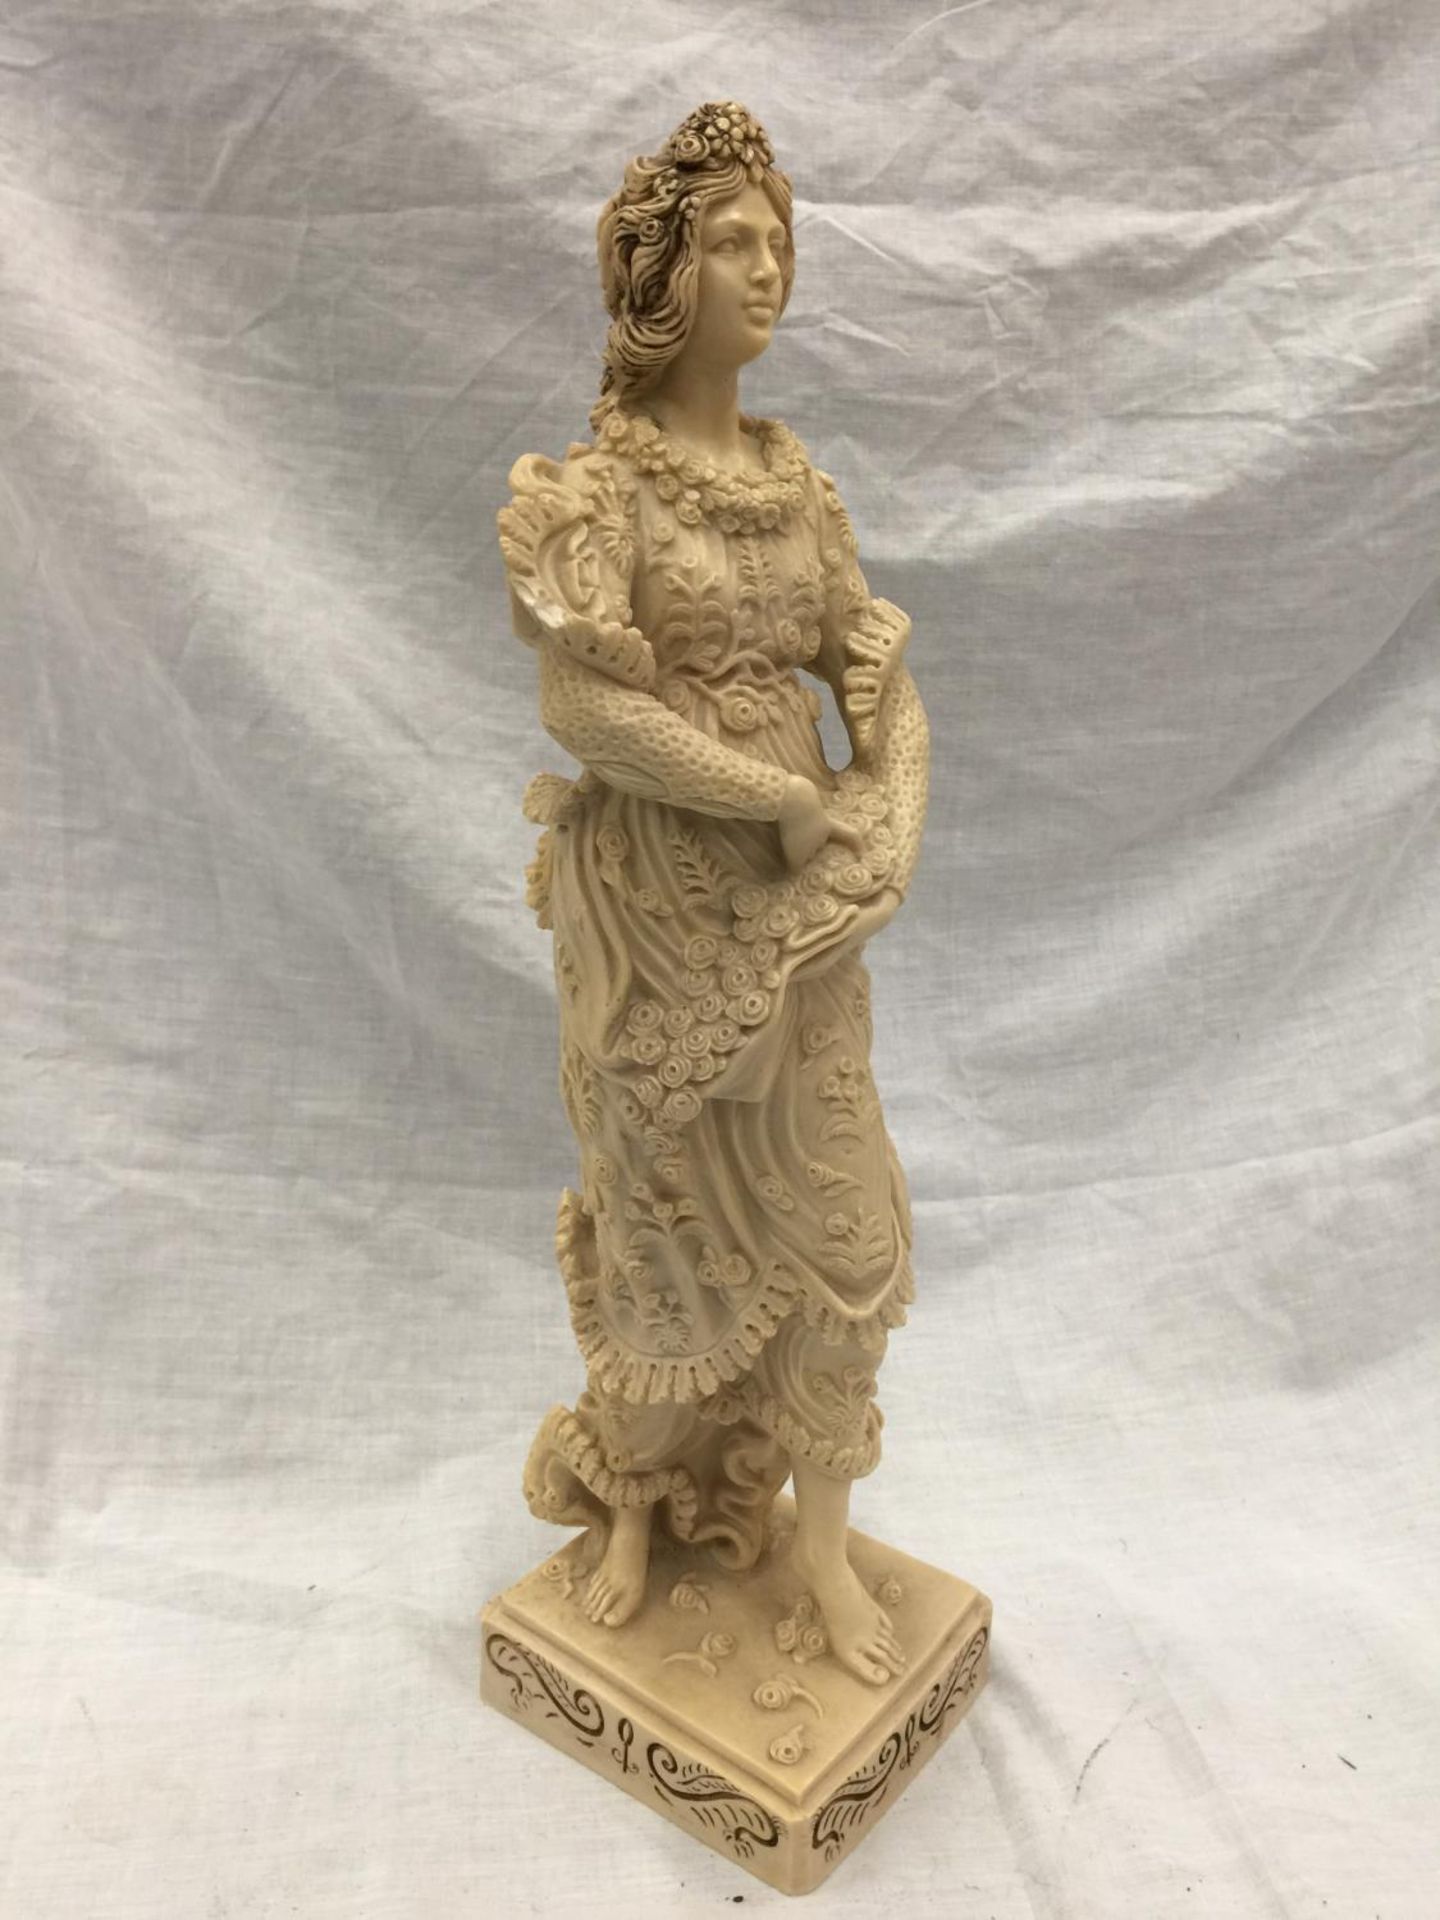 A CARVED RESIN FIGURE OF A GIRL WITH FLOWERS - Image 2 of 6